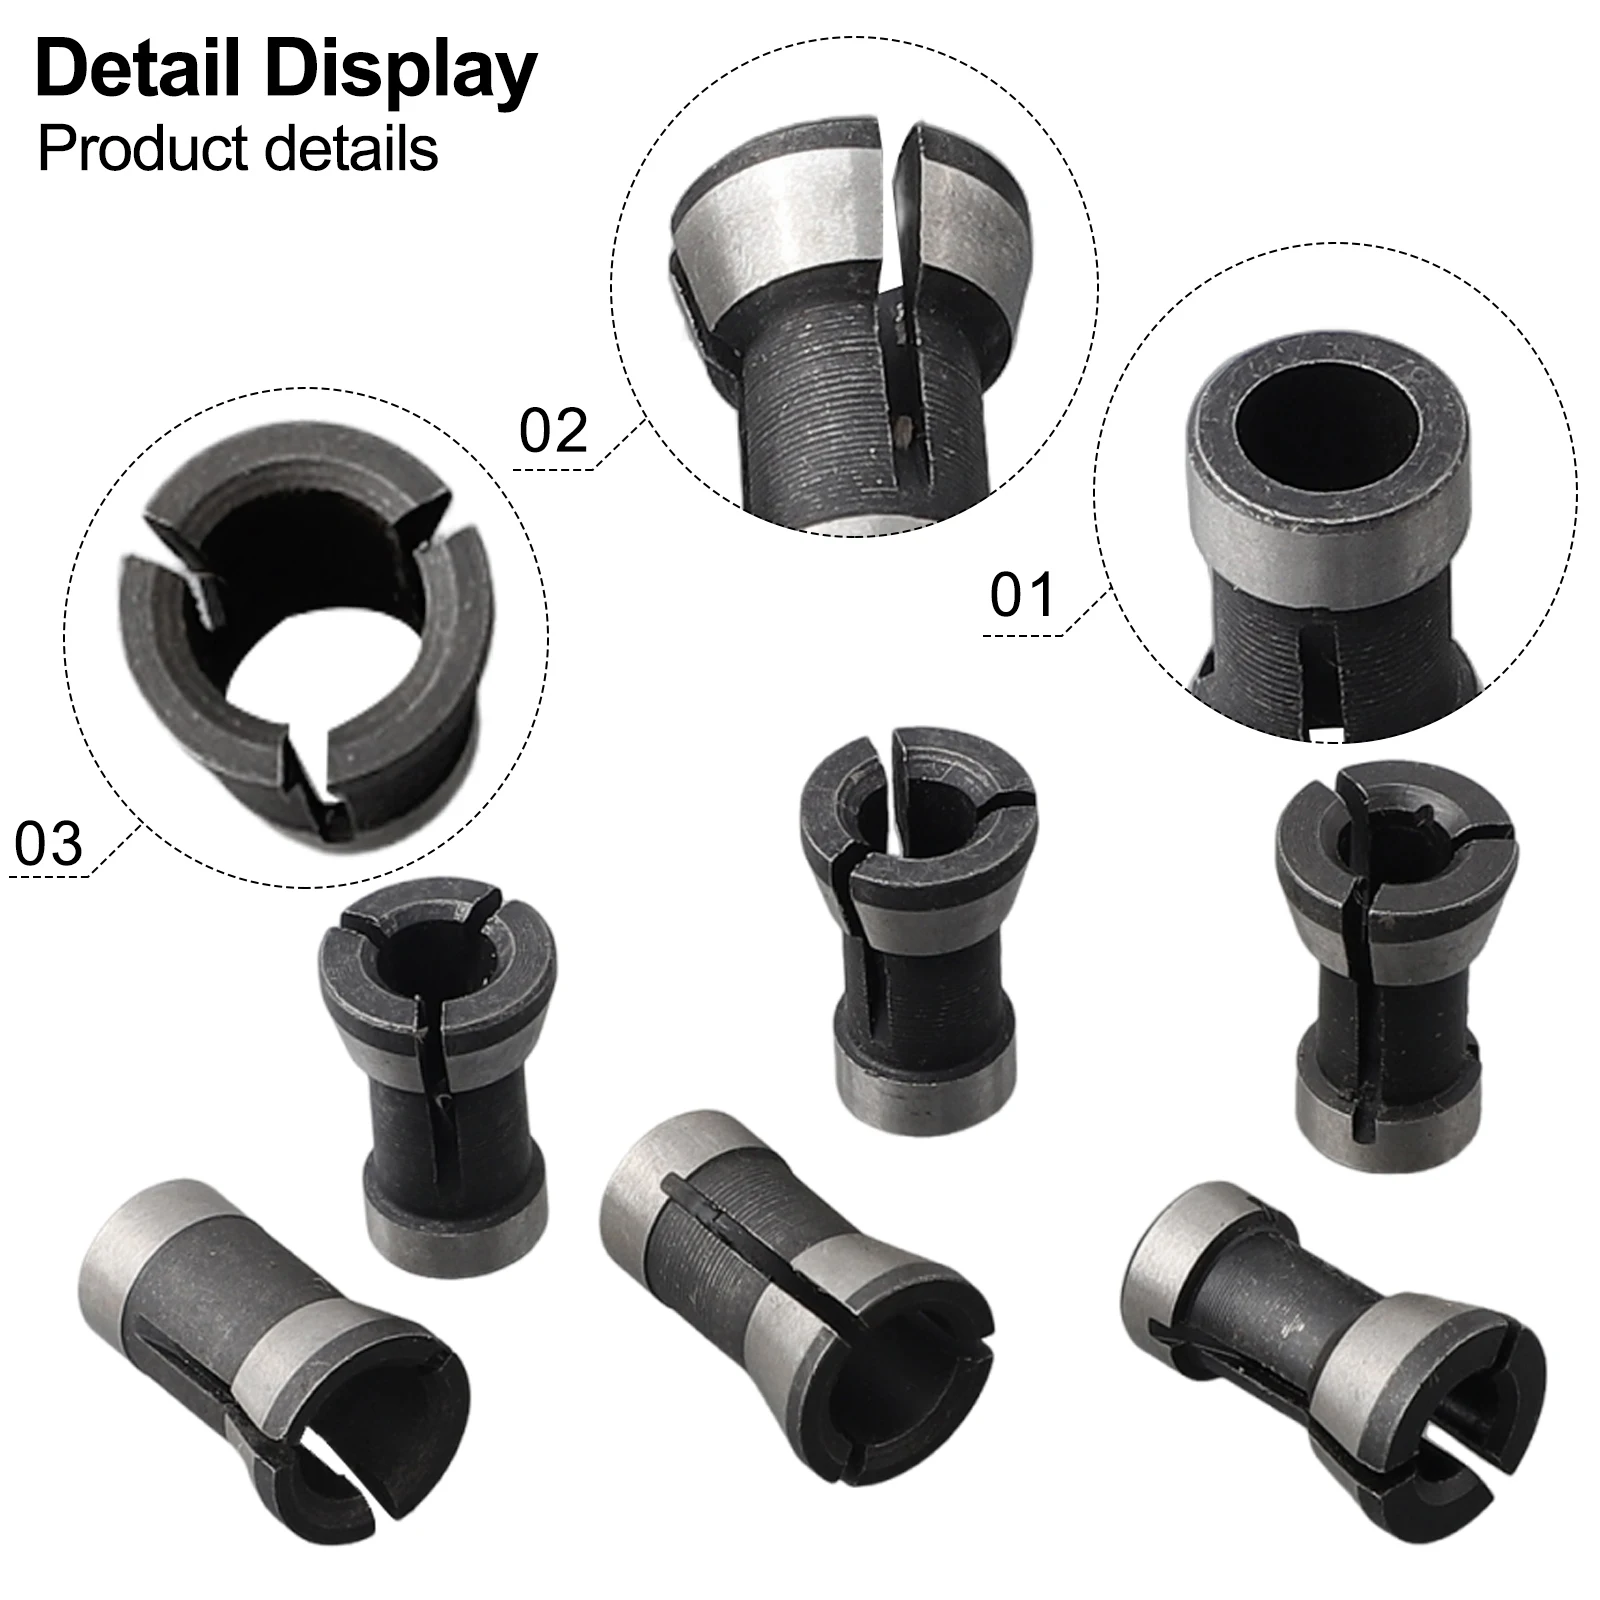 

6 Pieces Router Bit Collet Chuck Set with 3 Different Inner Diameters 6mm 635mm 8mm for Engraving and For Trimming